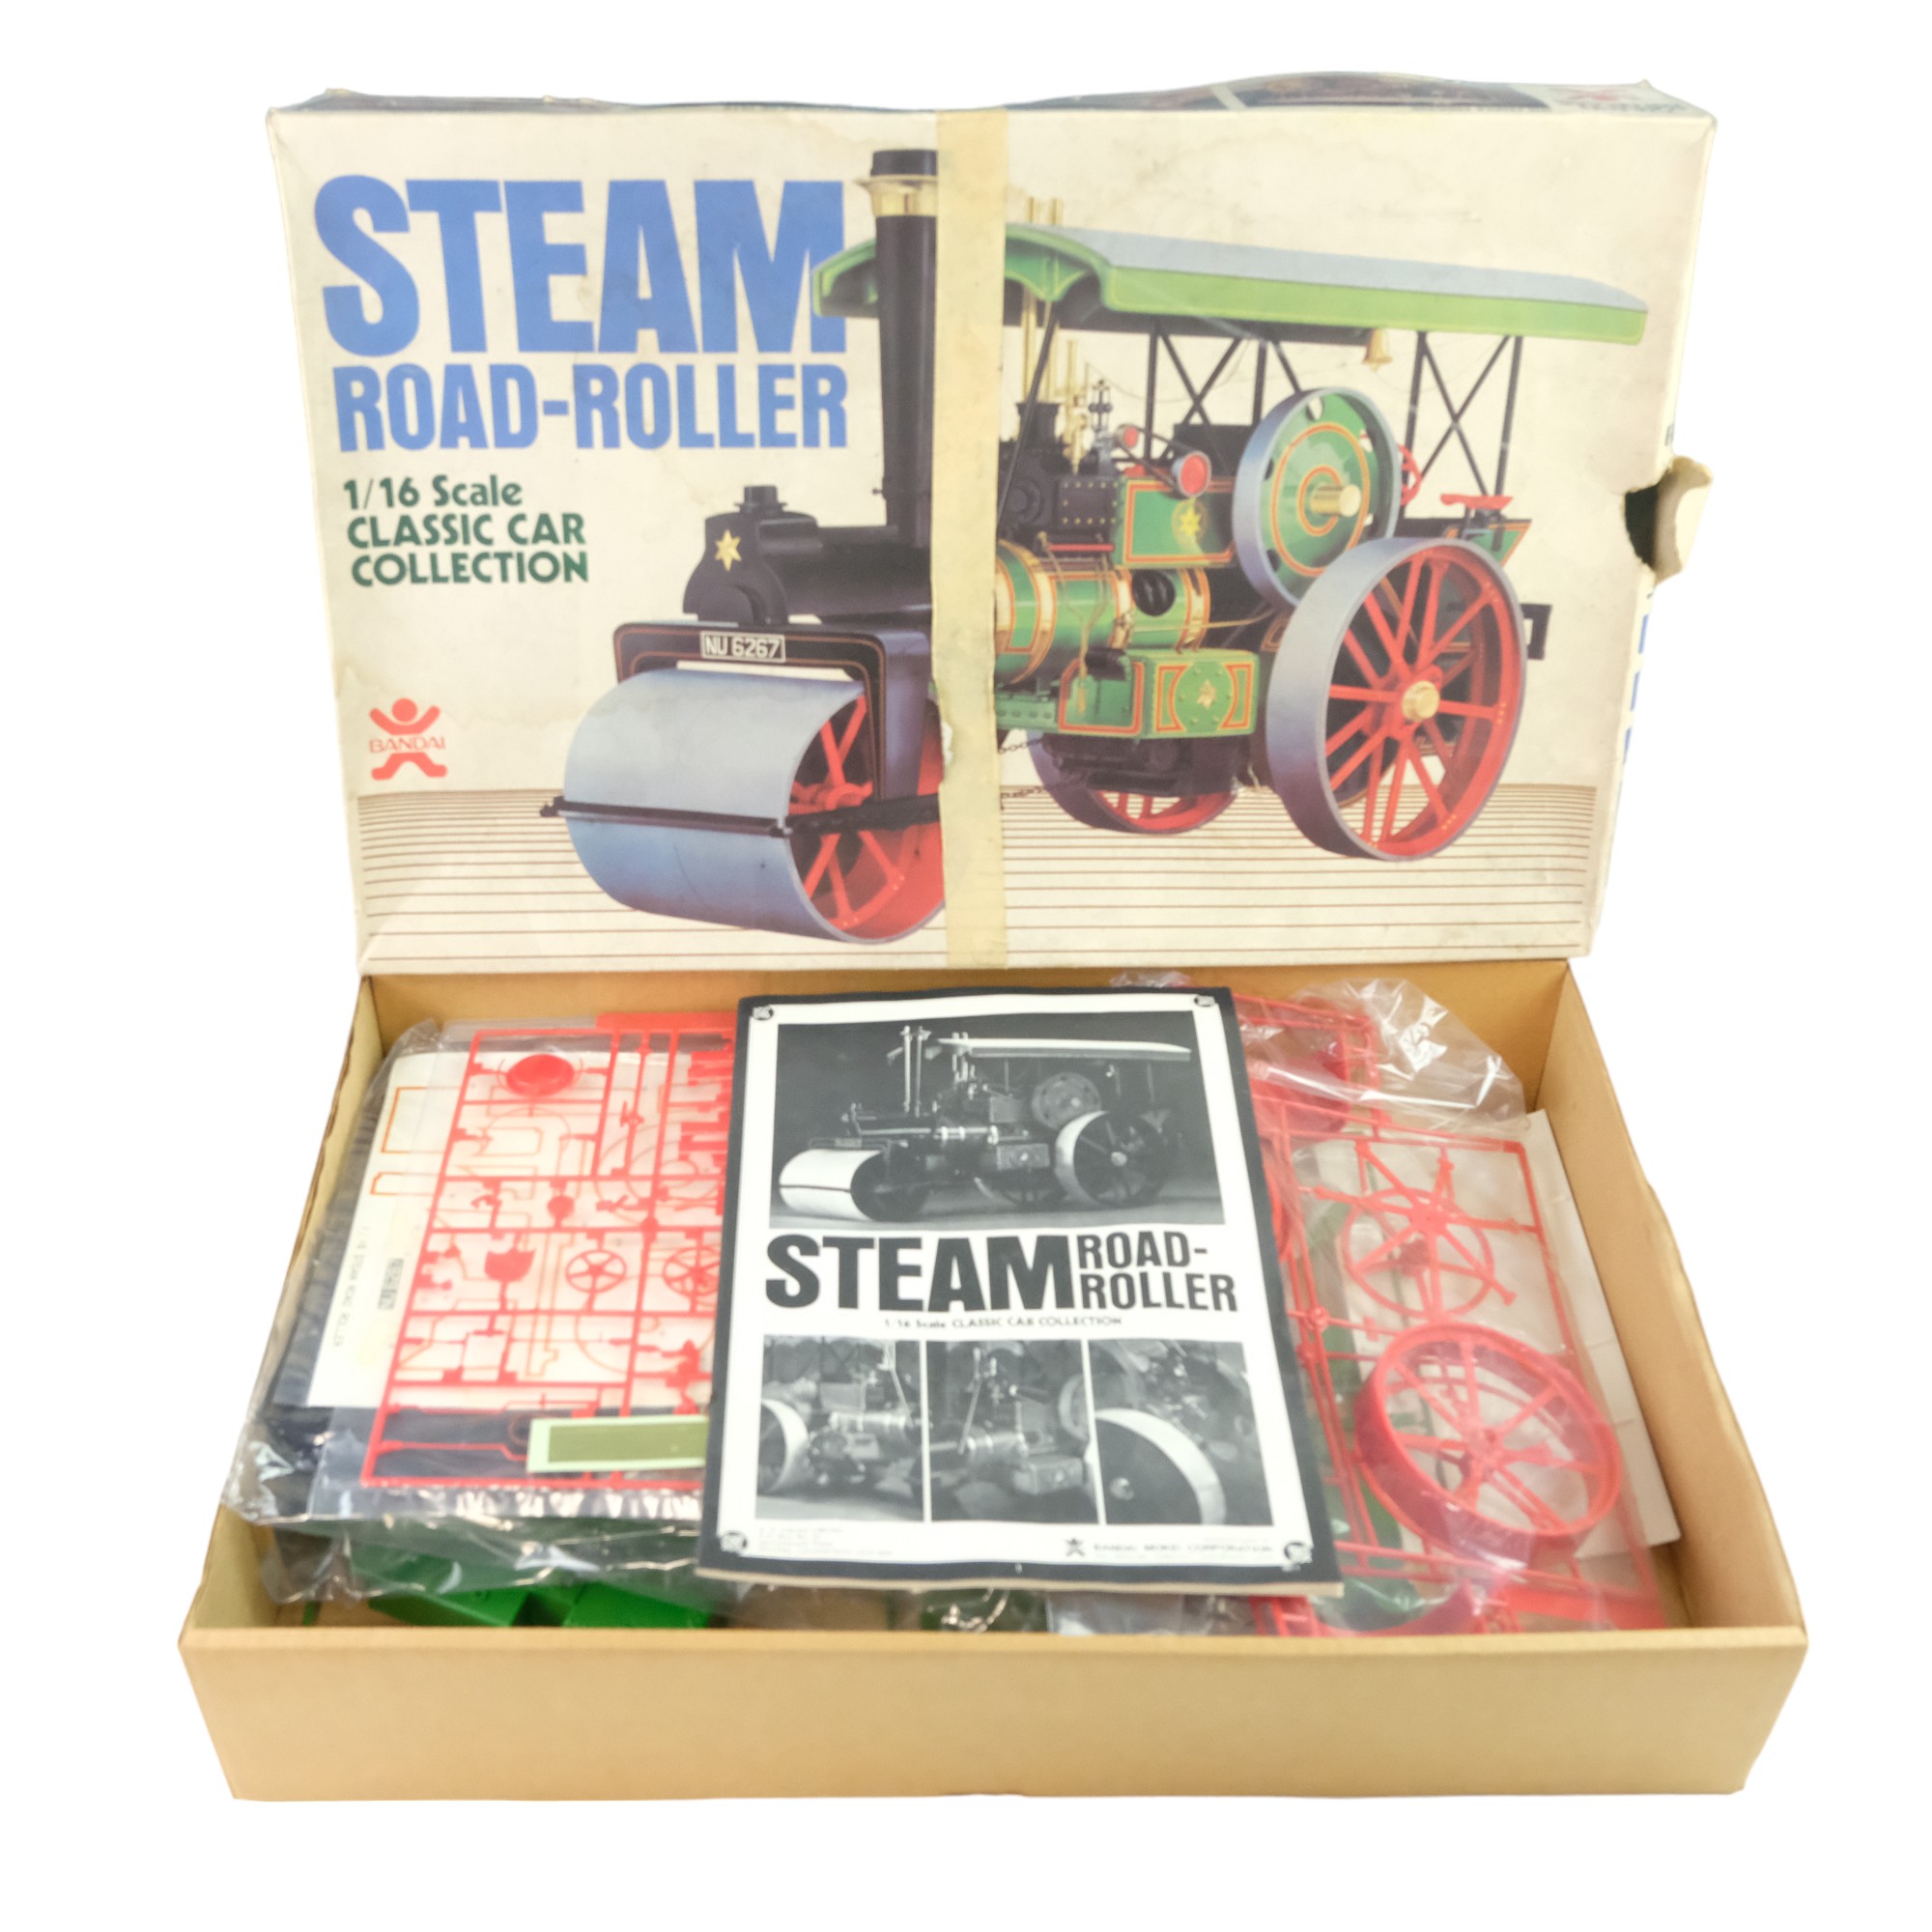 A boxed 1980s Steam Road-Roller 1/16 scale plastic model kit by Bandai